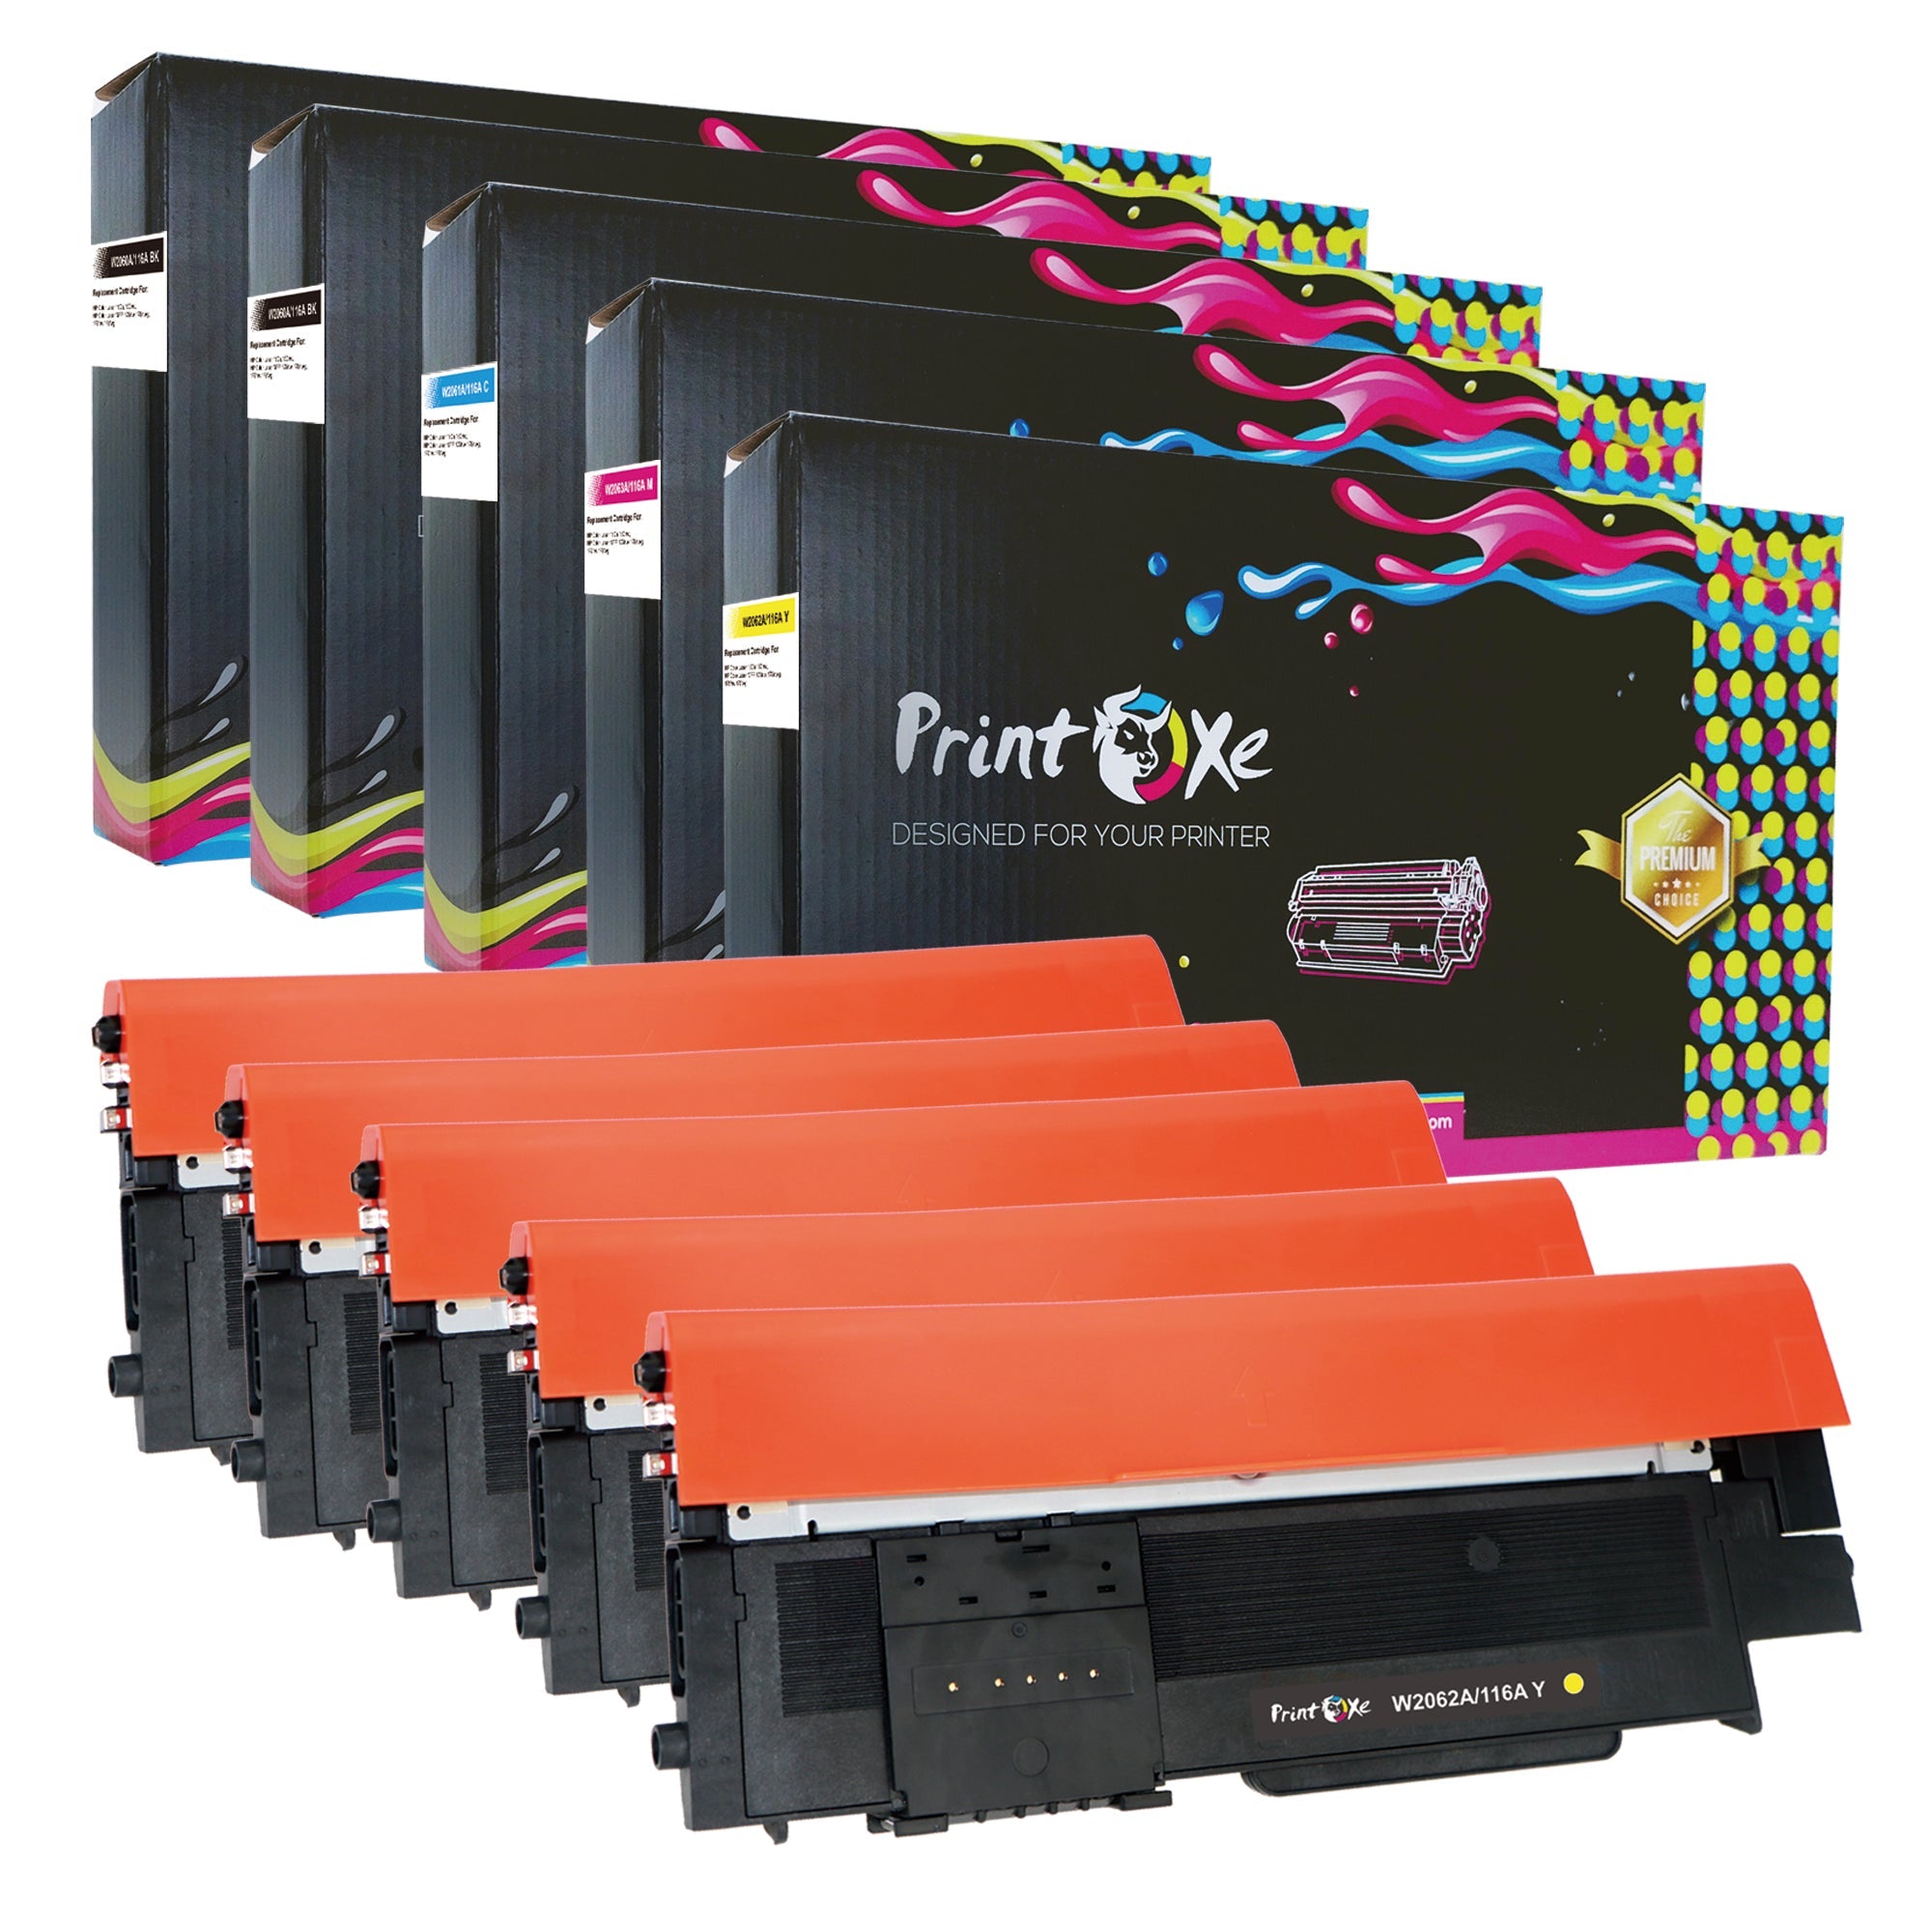 Compatible Color Toner Cartridge 116A Toner, W2060A to W2063A for